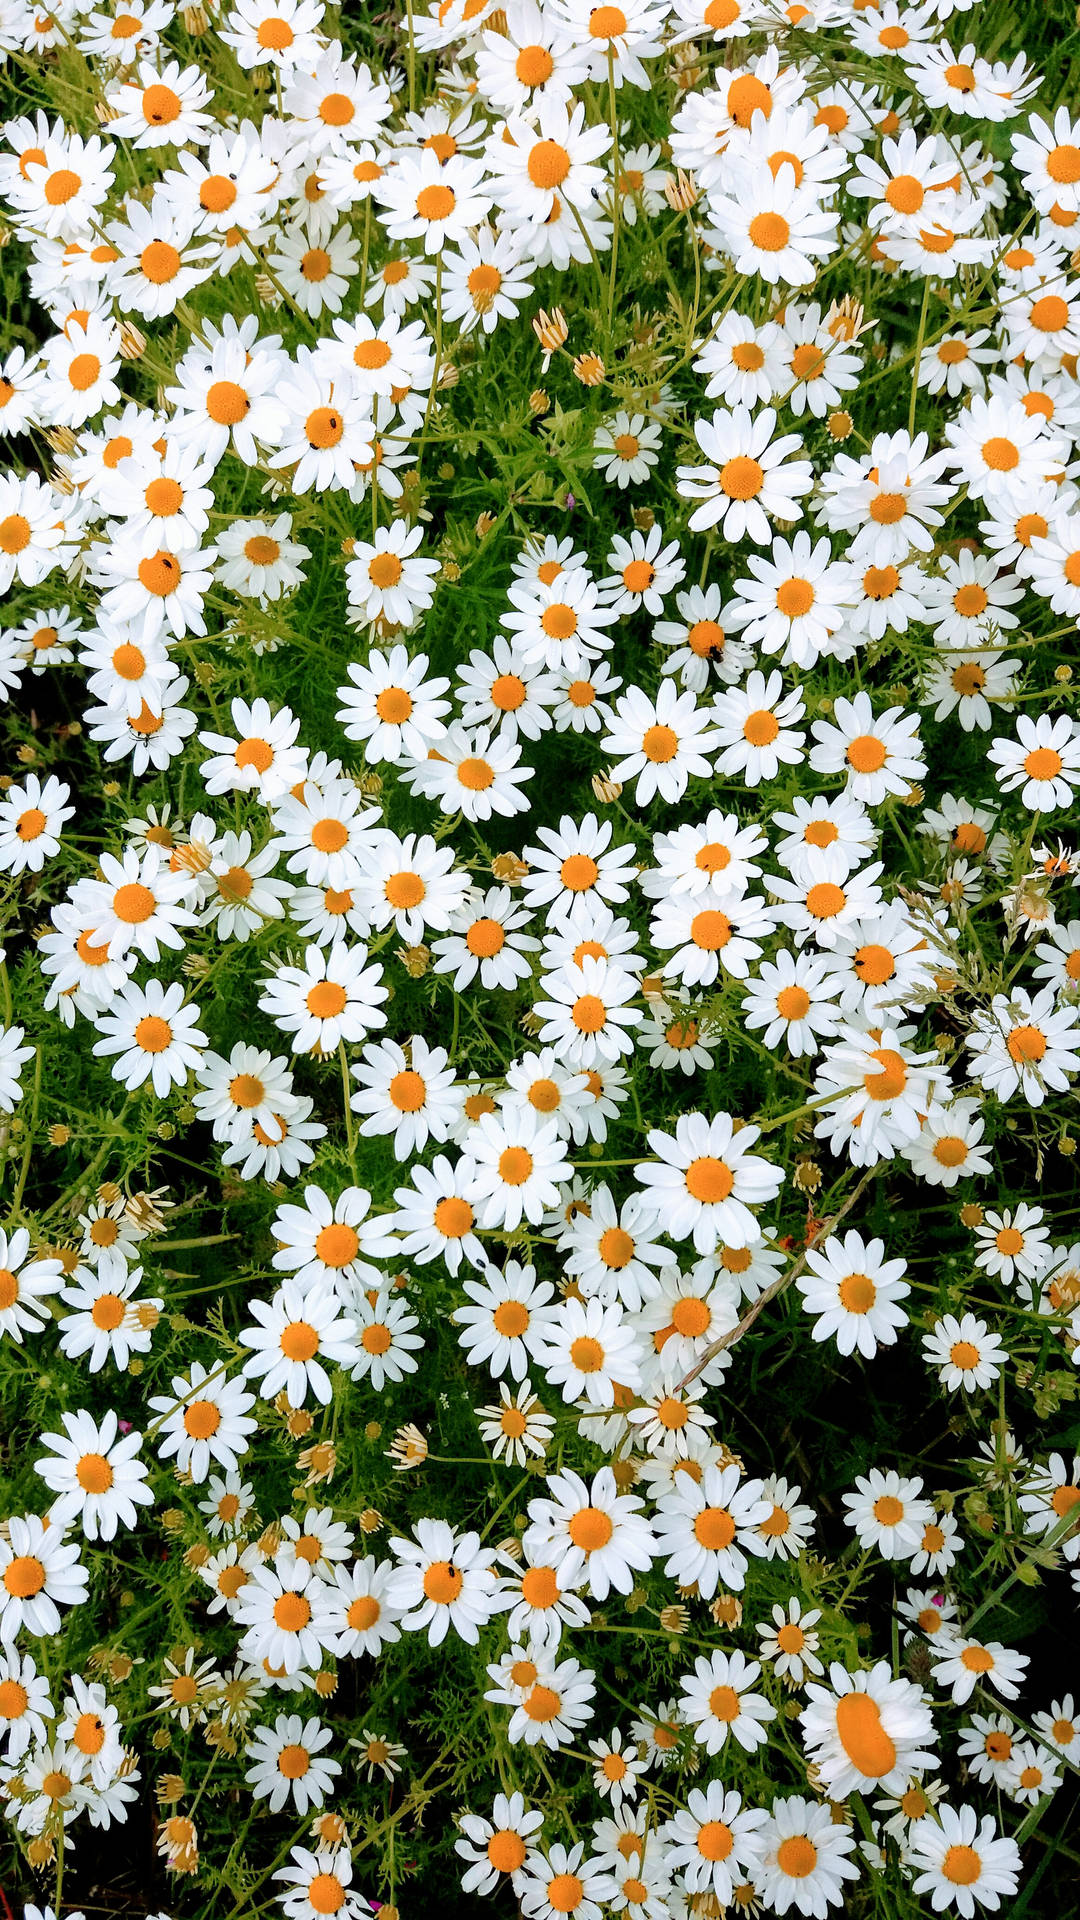 Daisy 2322X4128 Wallpaper and Background Image